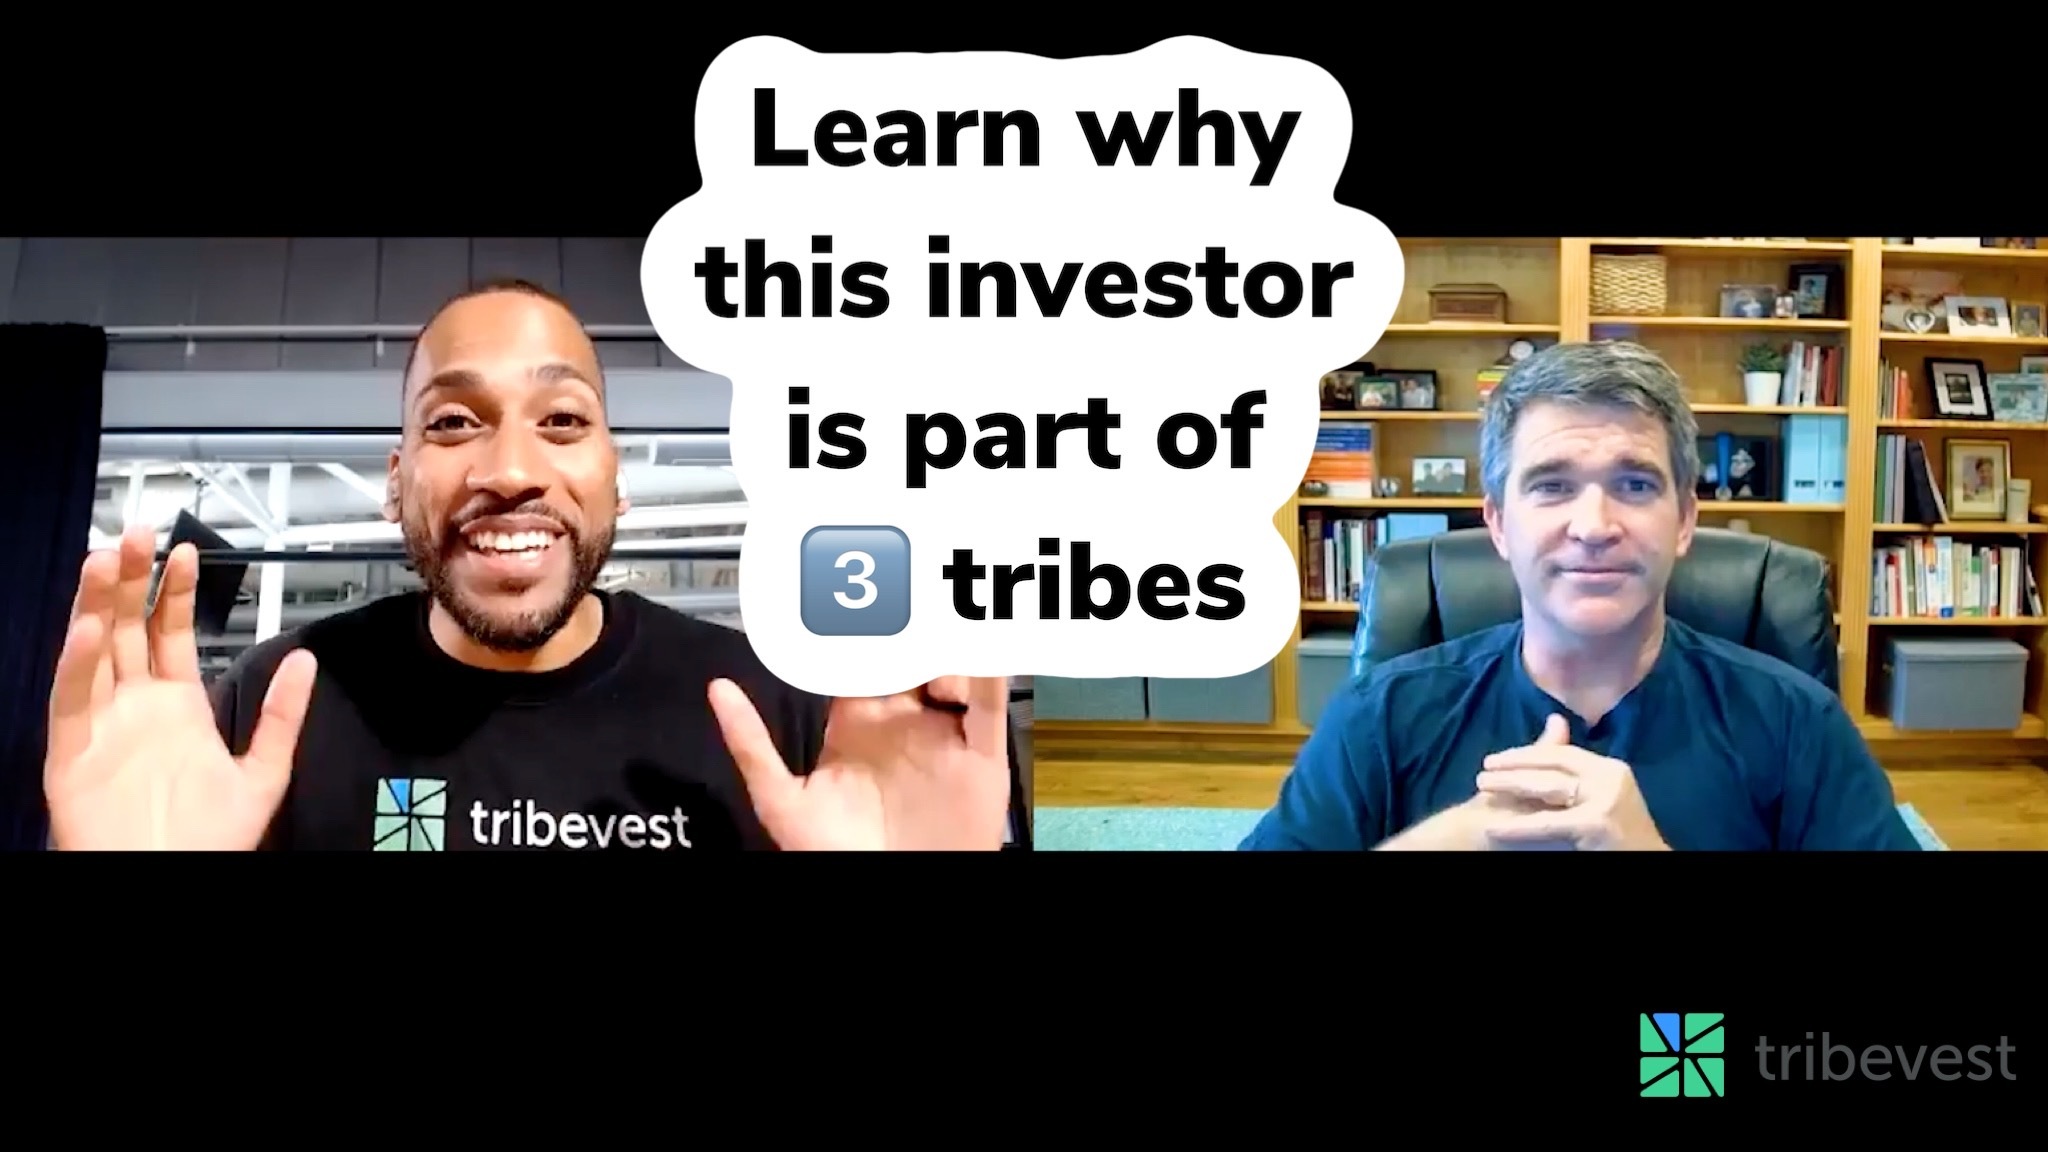 learn why this investor is part of 3 tribes tribevest